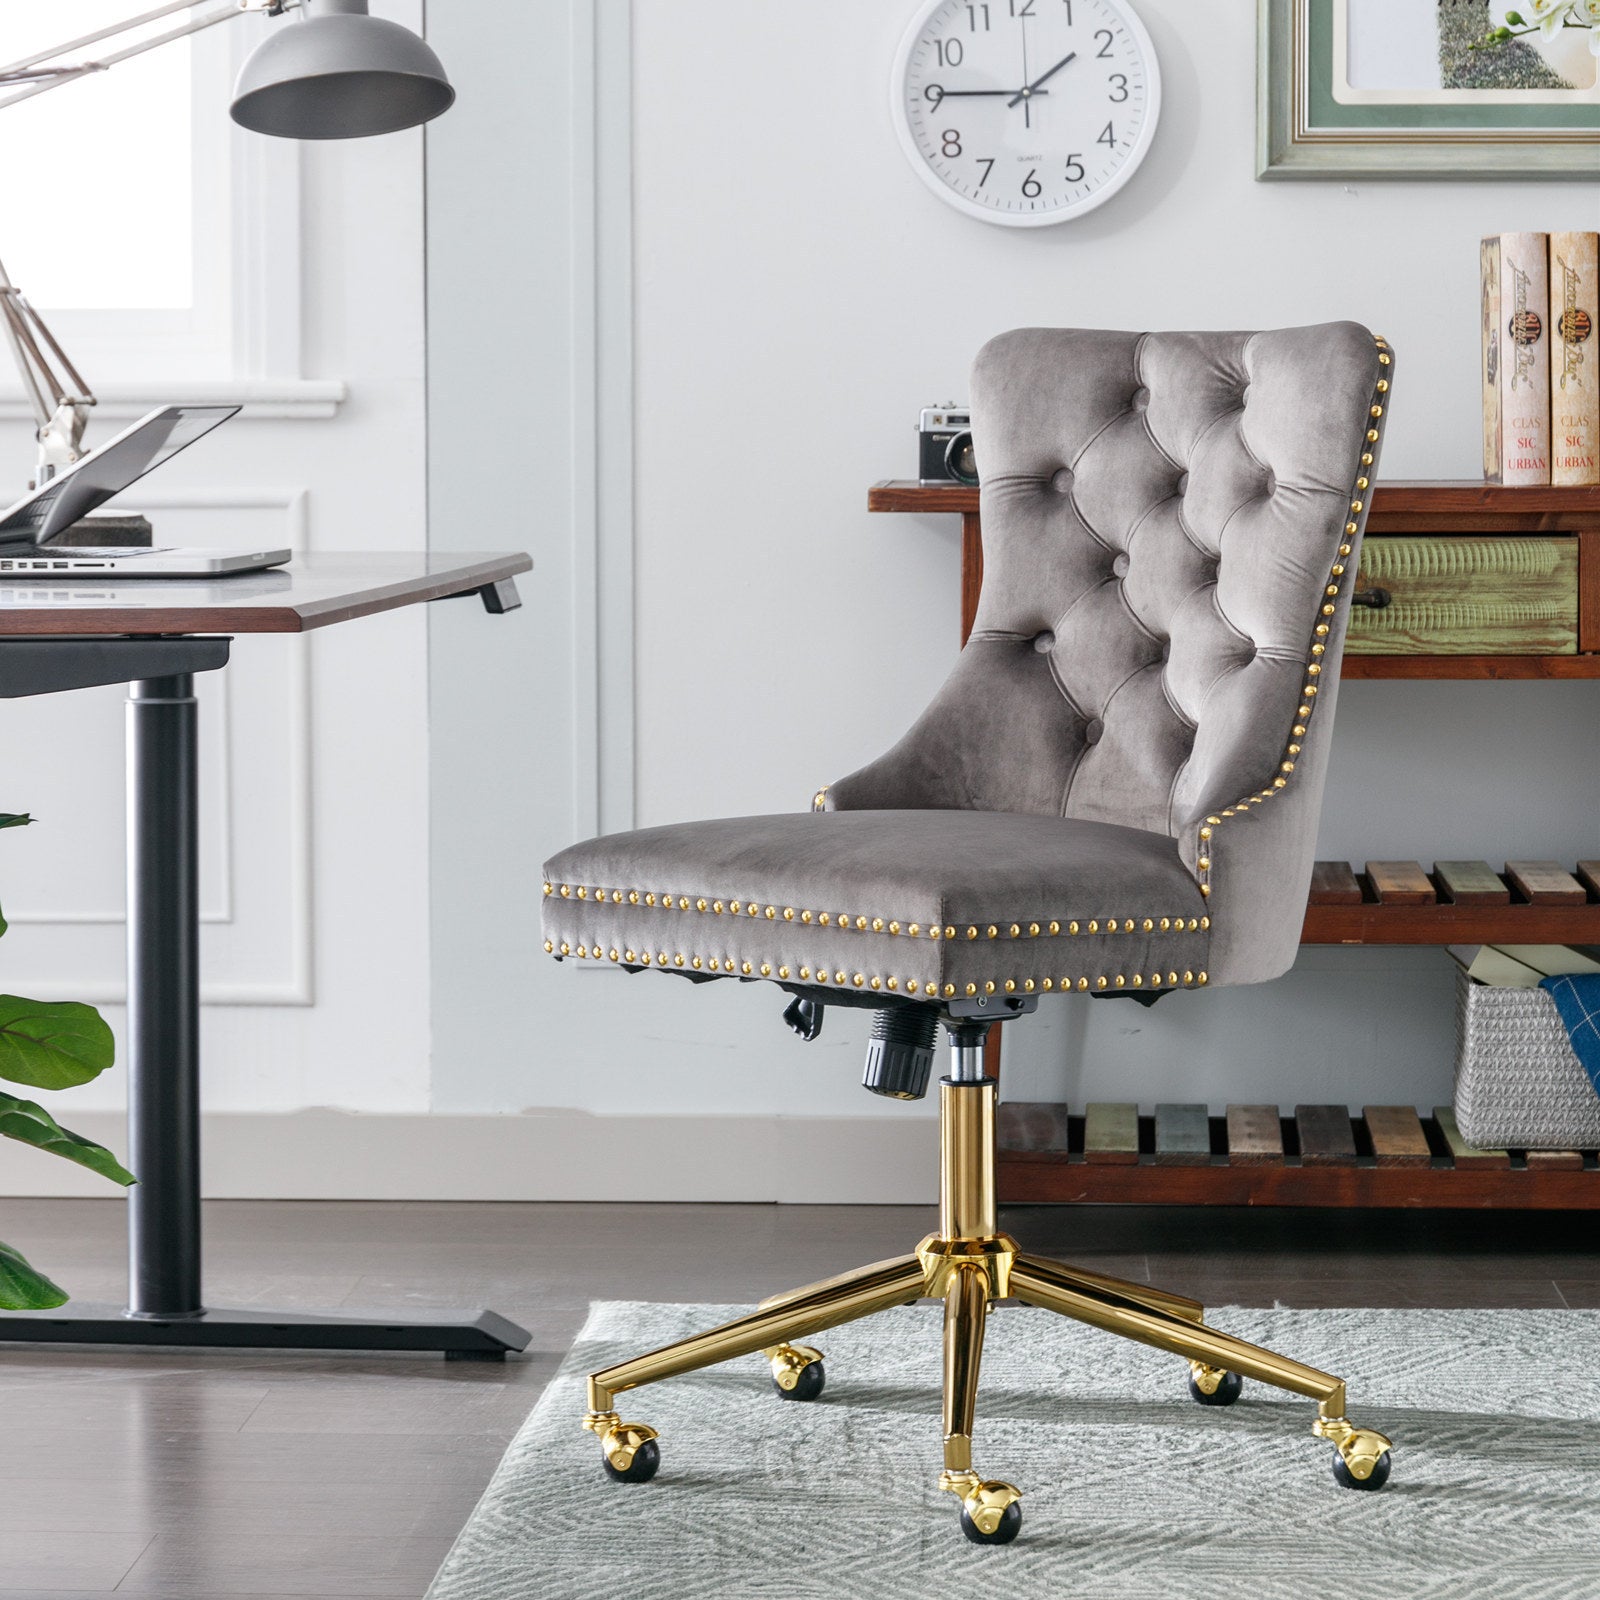 Velvet Upholstered Tufted Button Home Office Chair with Golden Metal Base - Grey